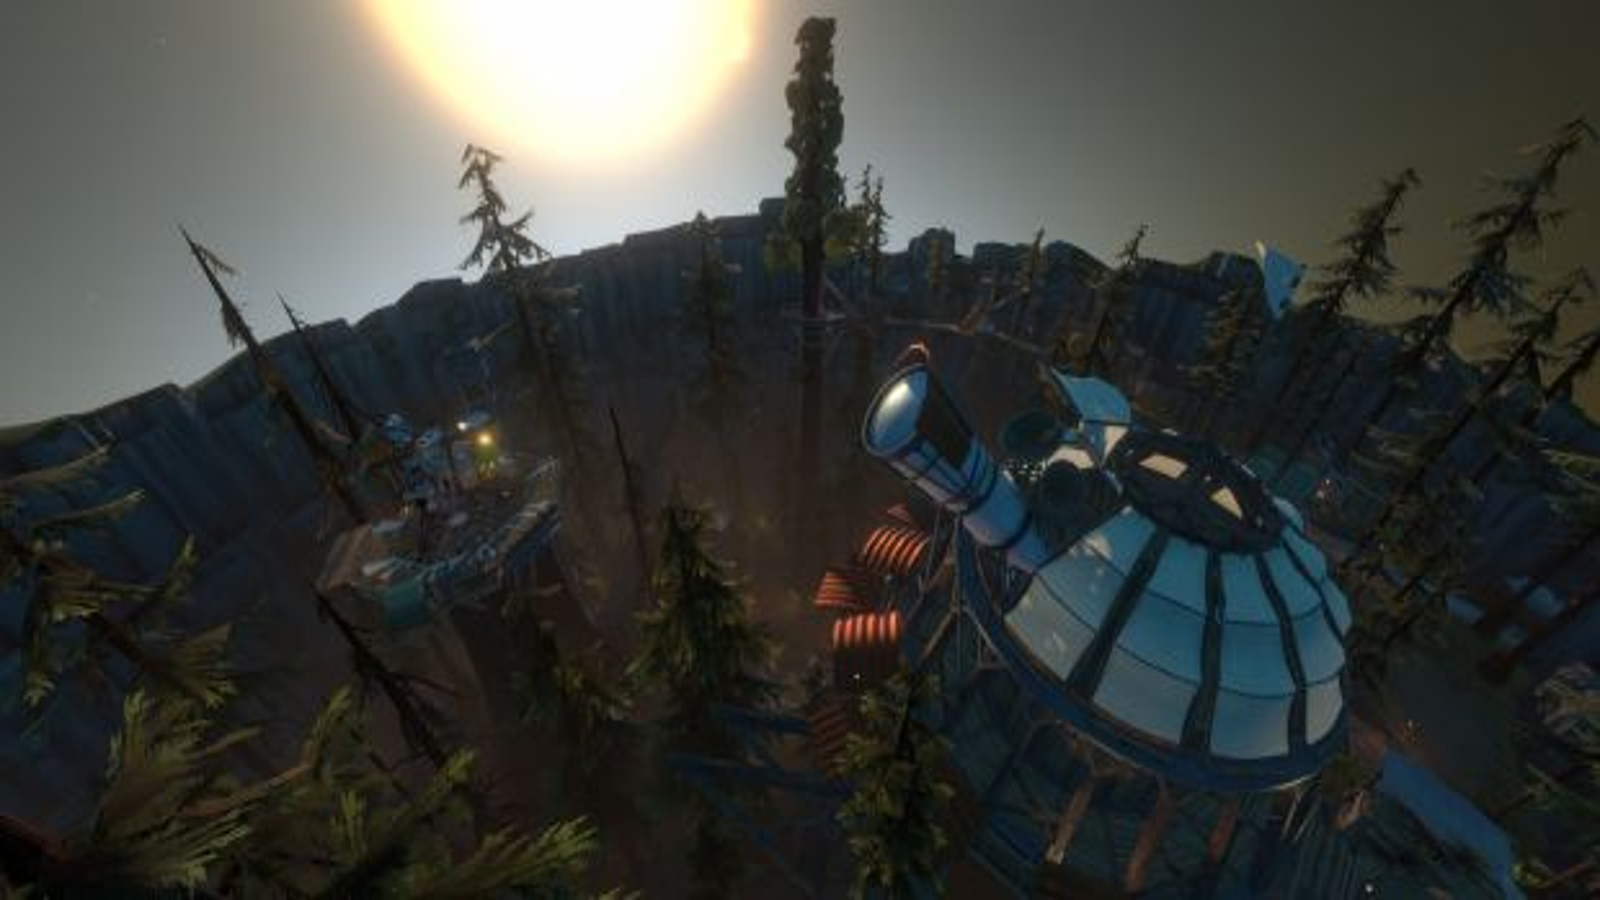 Outer Wilds Archives - XboxEra